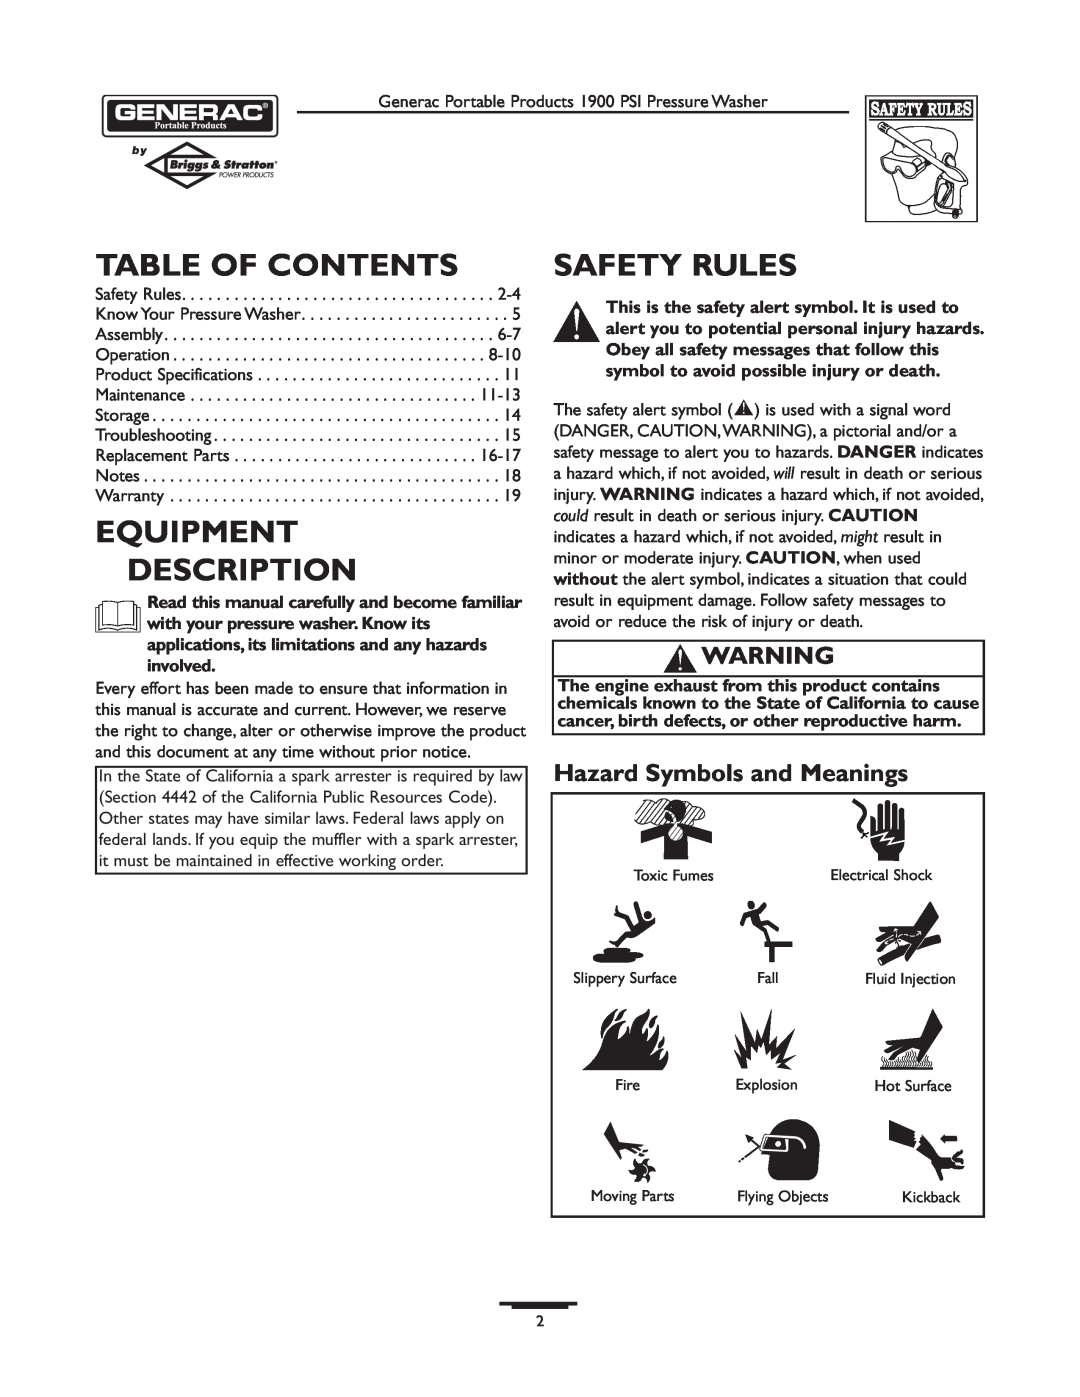 Briggs & Stratton 1900PSI owner manual Table Of Contents, Equipment Description, Safety Rules, Hazard Symbols and Meanings 